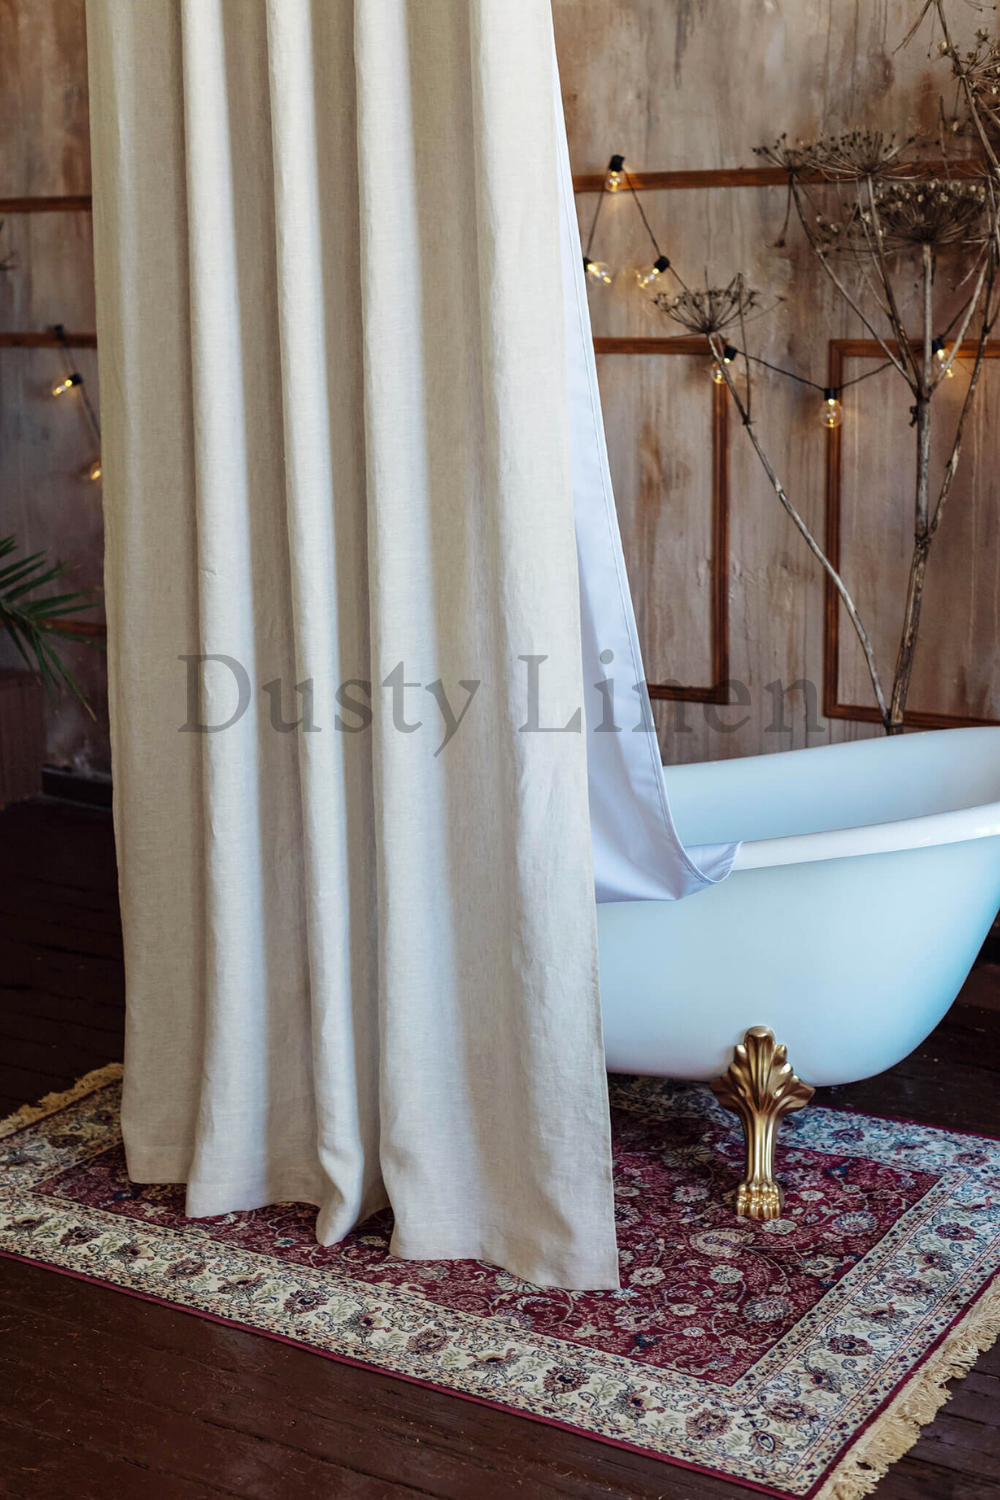 Dusty Linen made best selling natural light color linen bath curtain for rustic interior